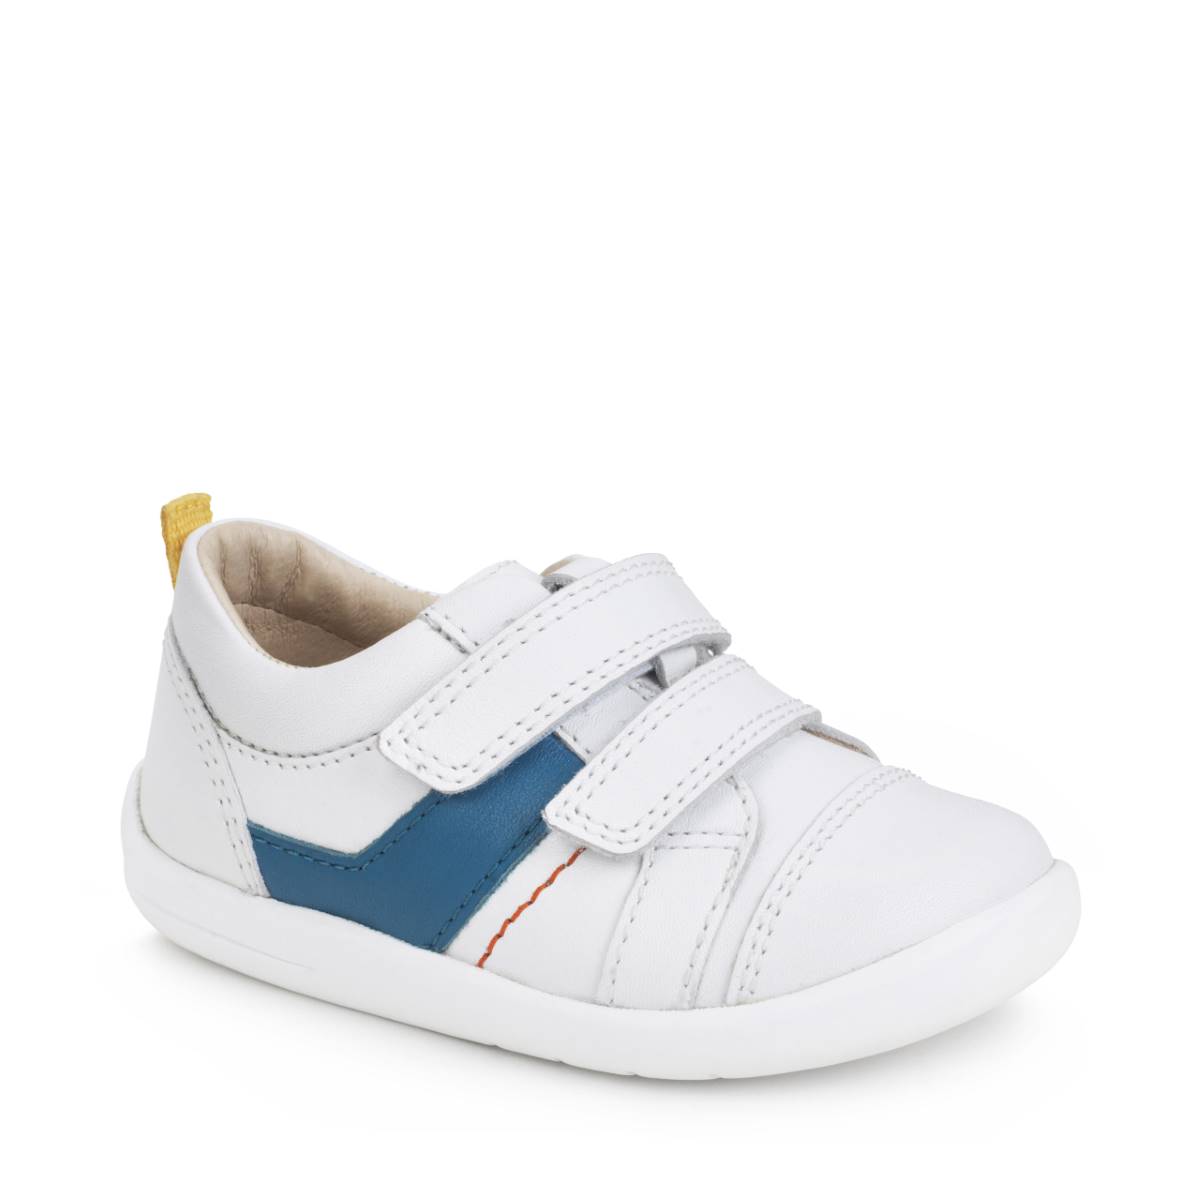 Start Rite Maze WHITE LEATHER Kids Boys Toddler Shoes 0818-46F in a Plain Leather in Size 5